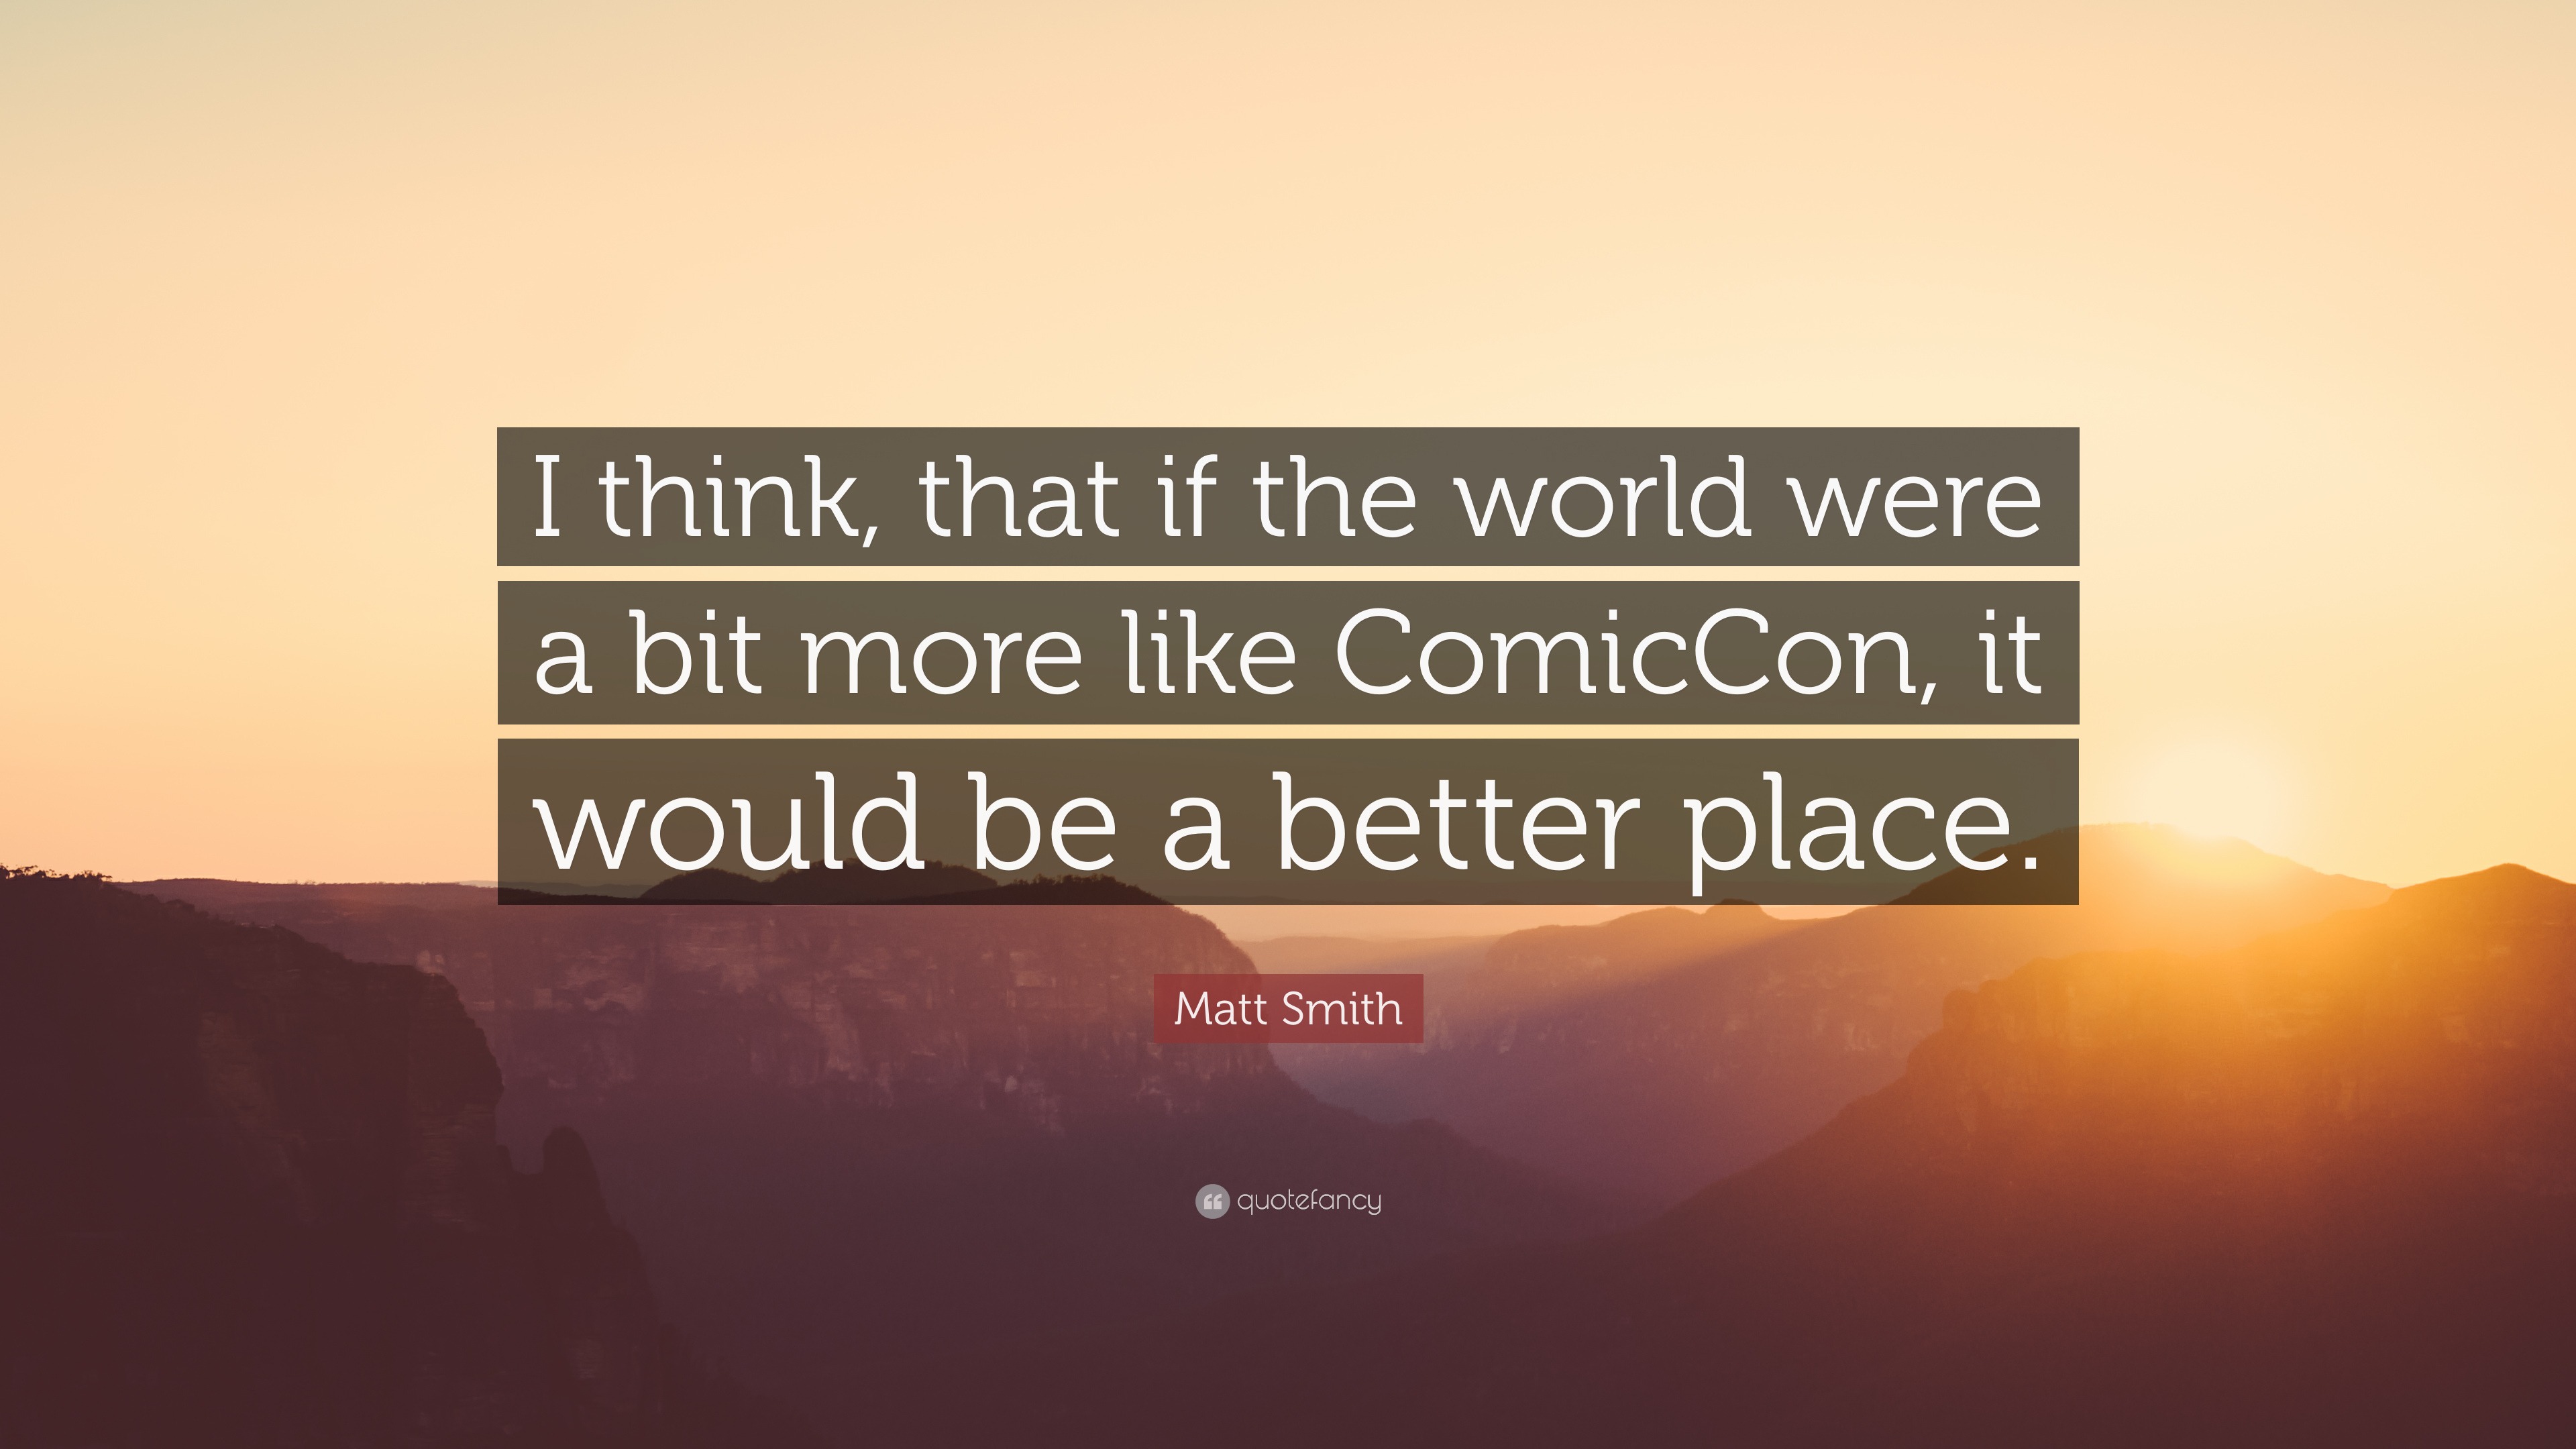 Matt Smith Quote: “I think, that if the world were a bit more like ...